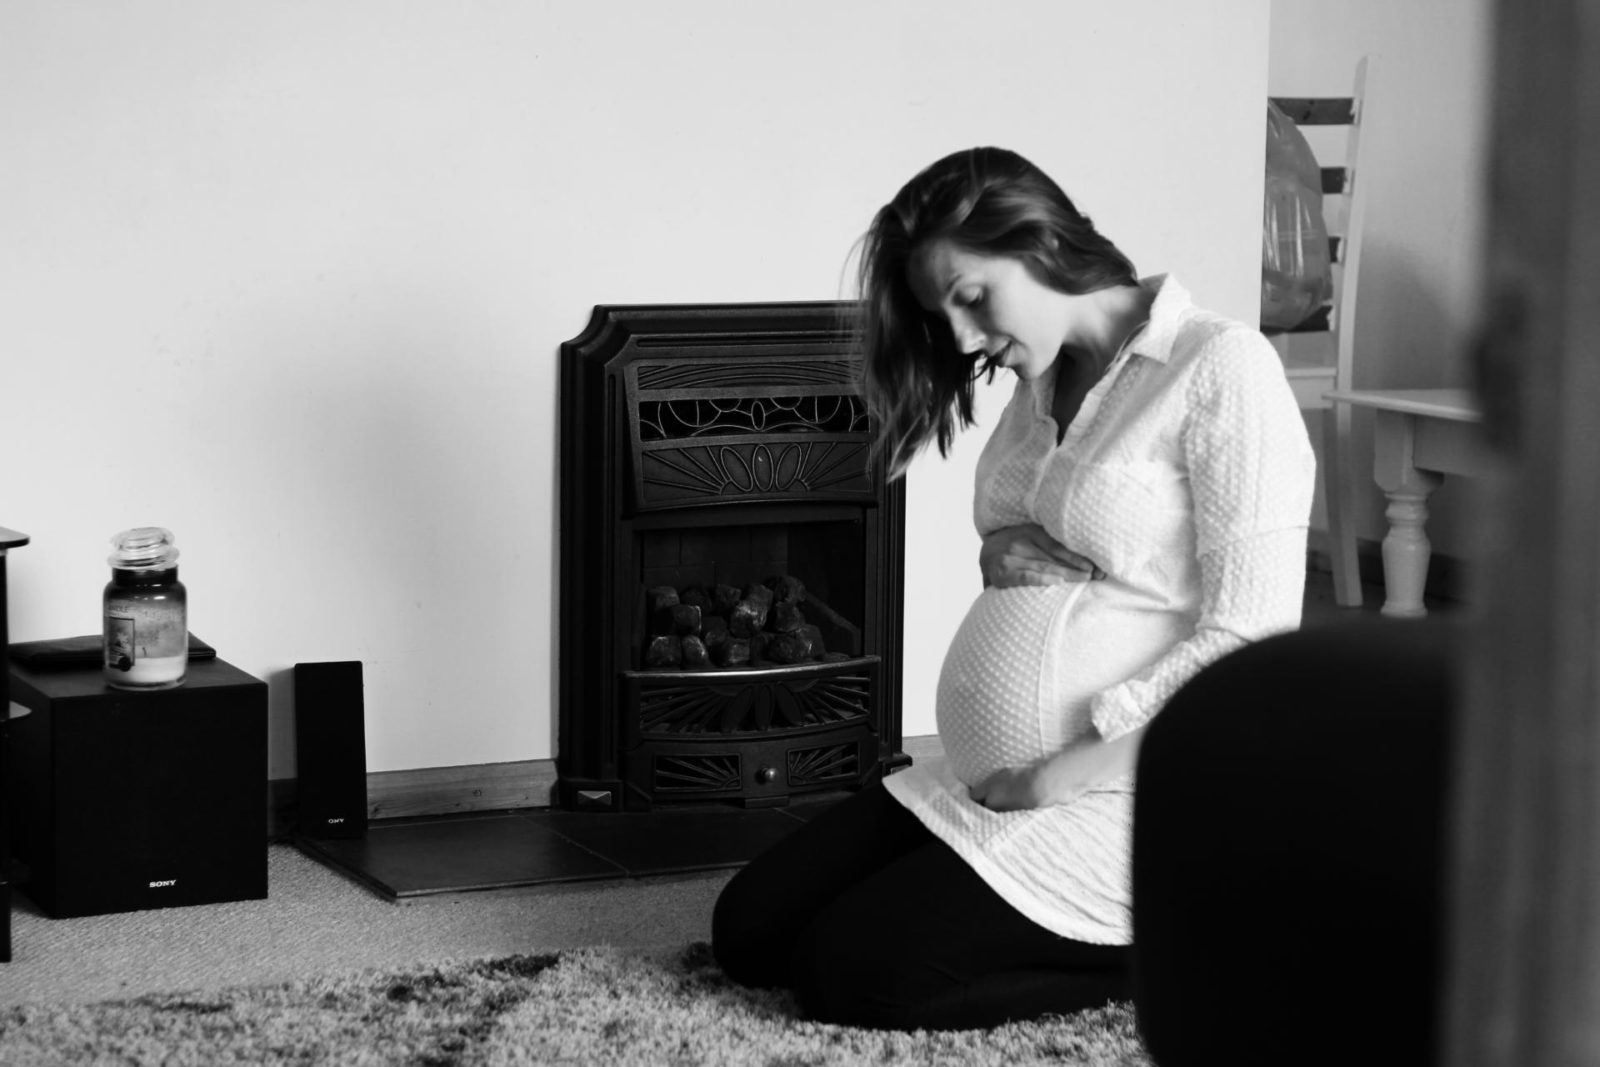 The Last Days Of Pregnancy